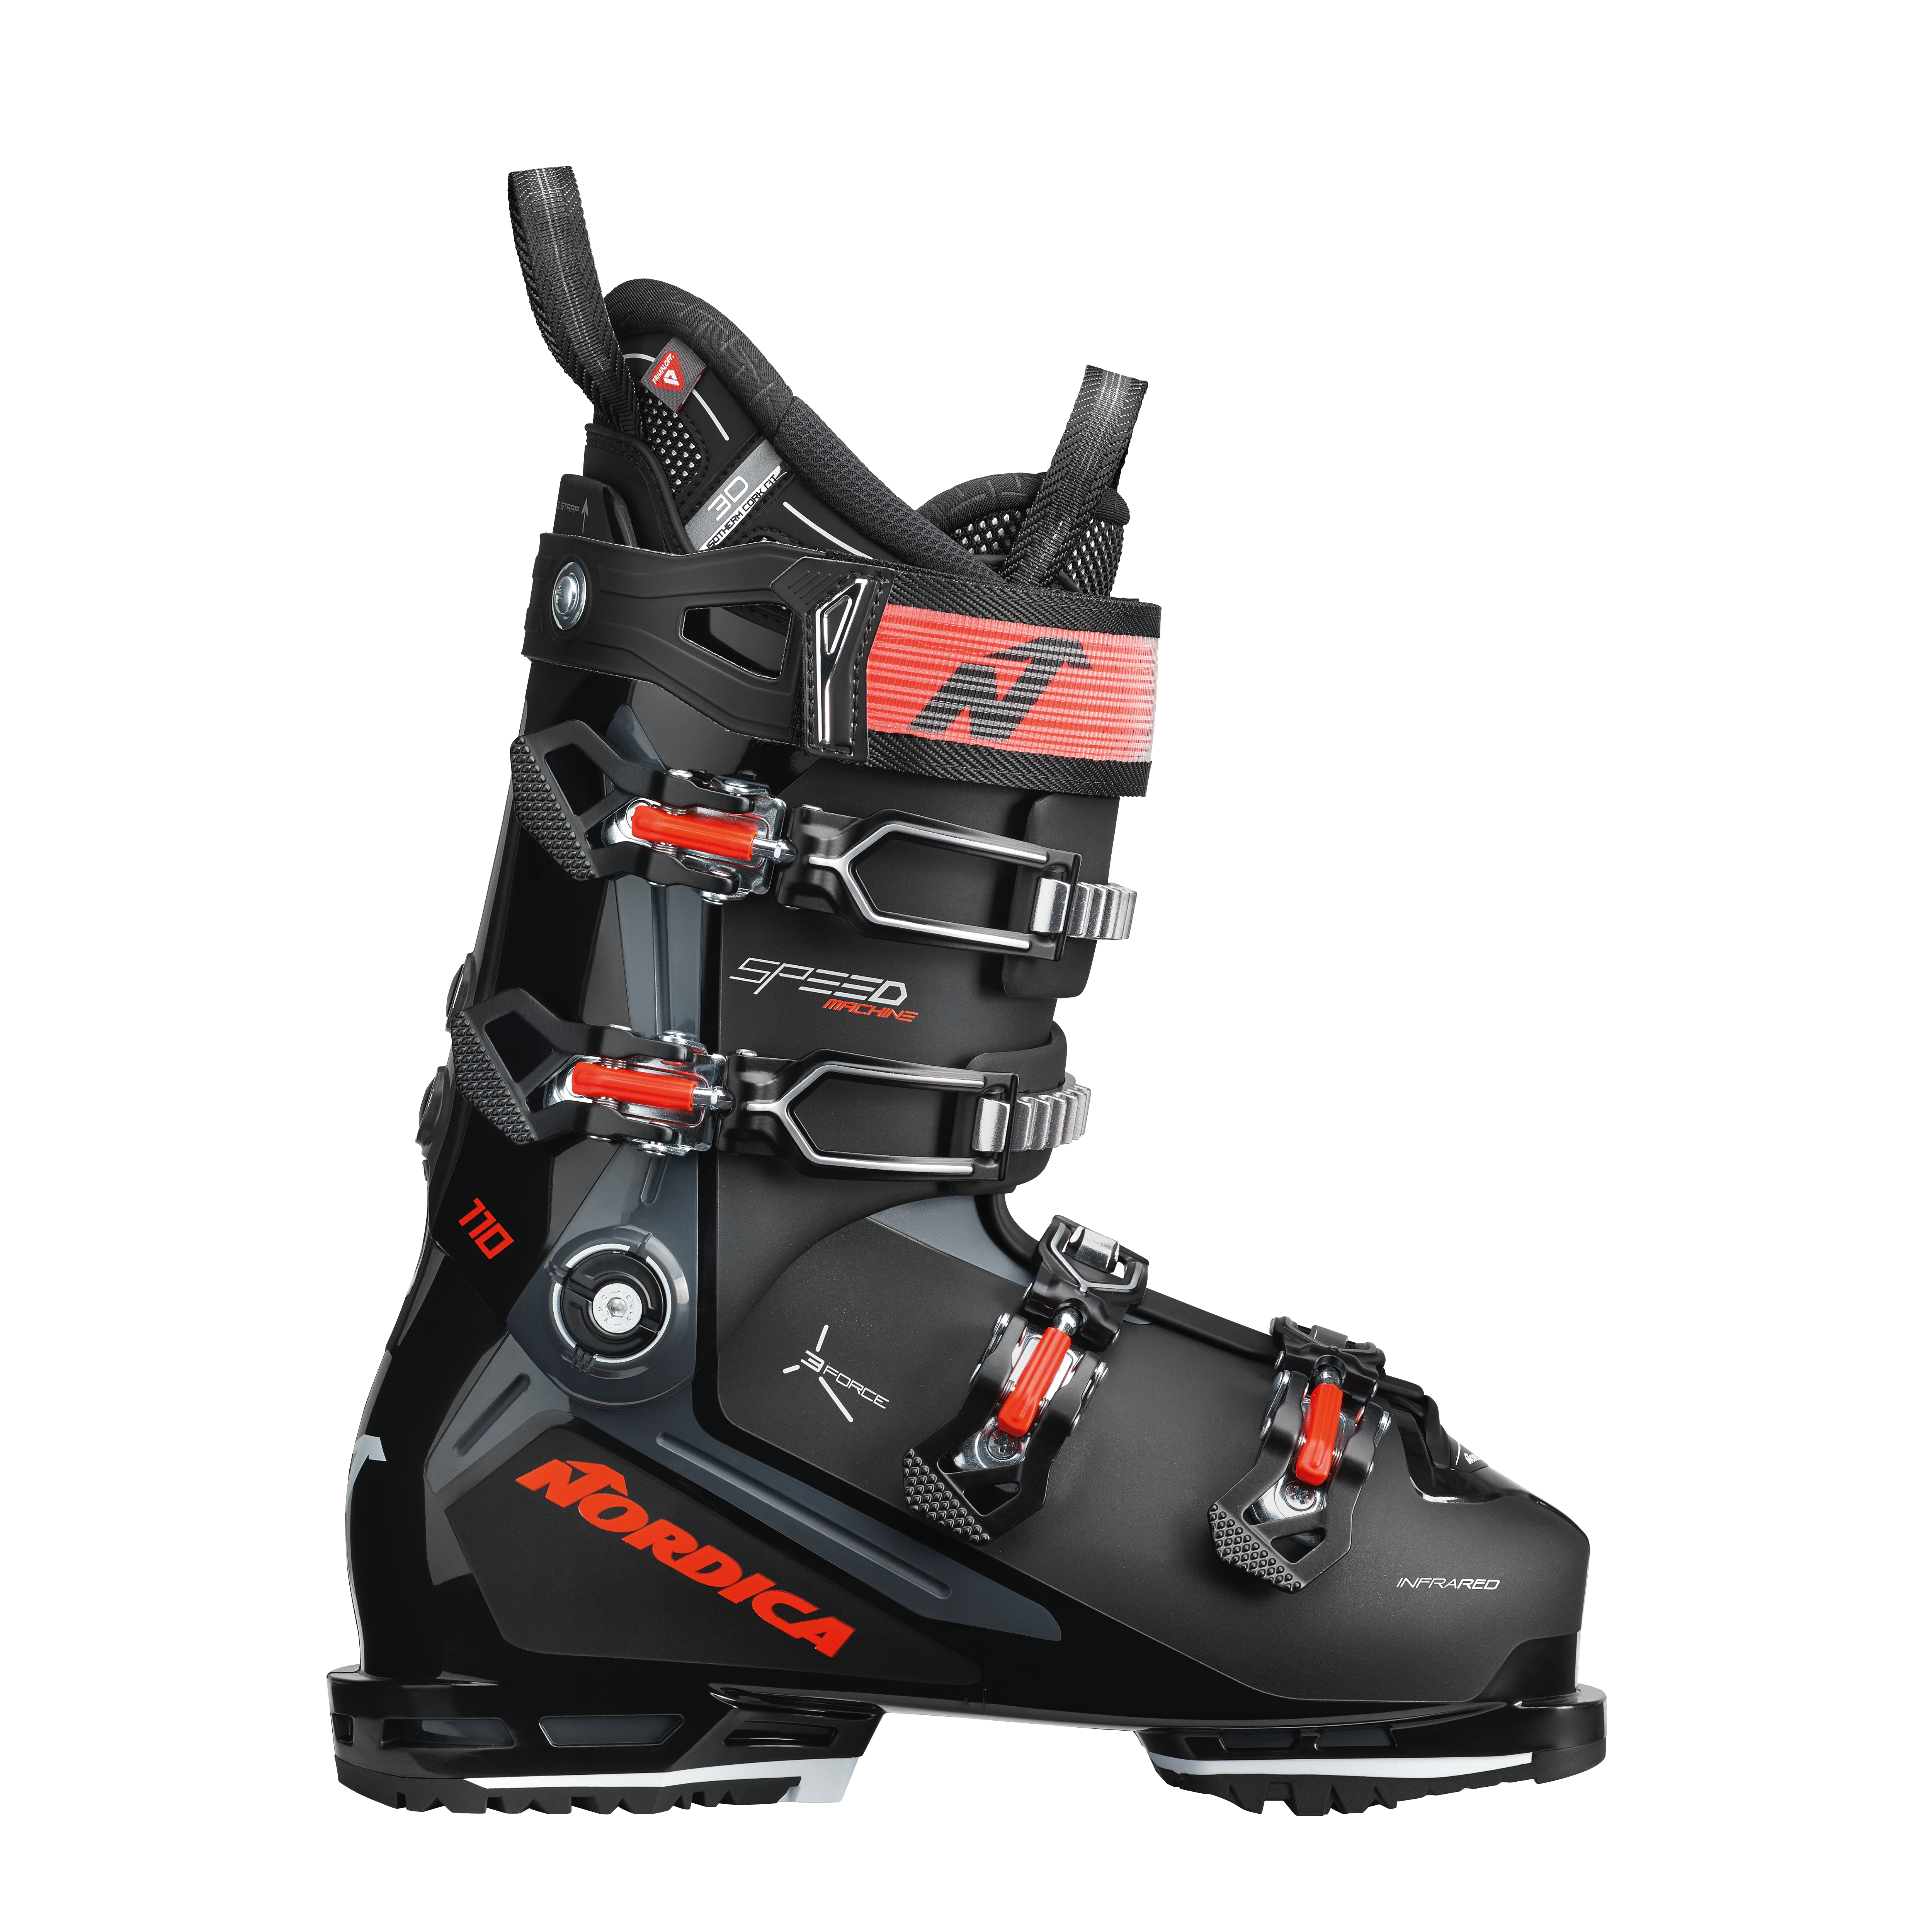 Speedmachine Nordica - Skis and Boots – Official website